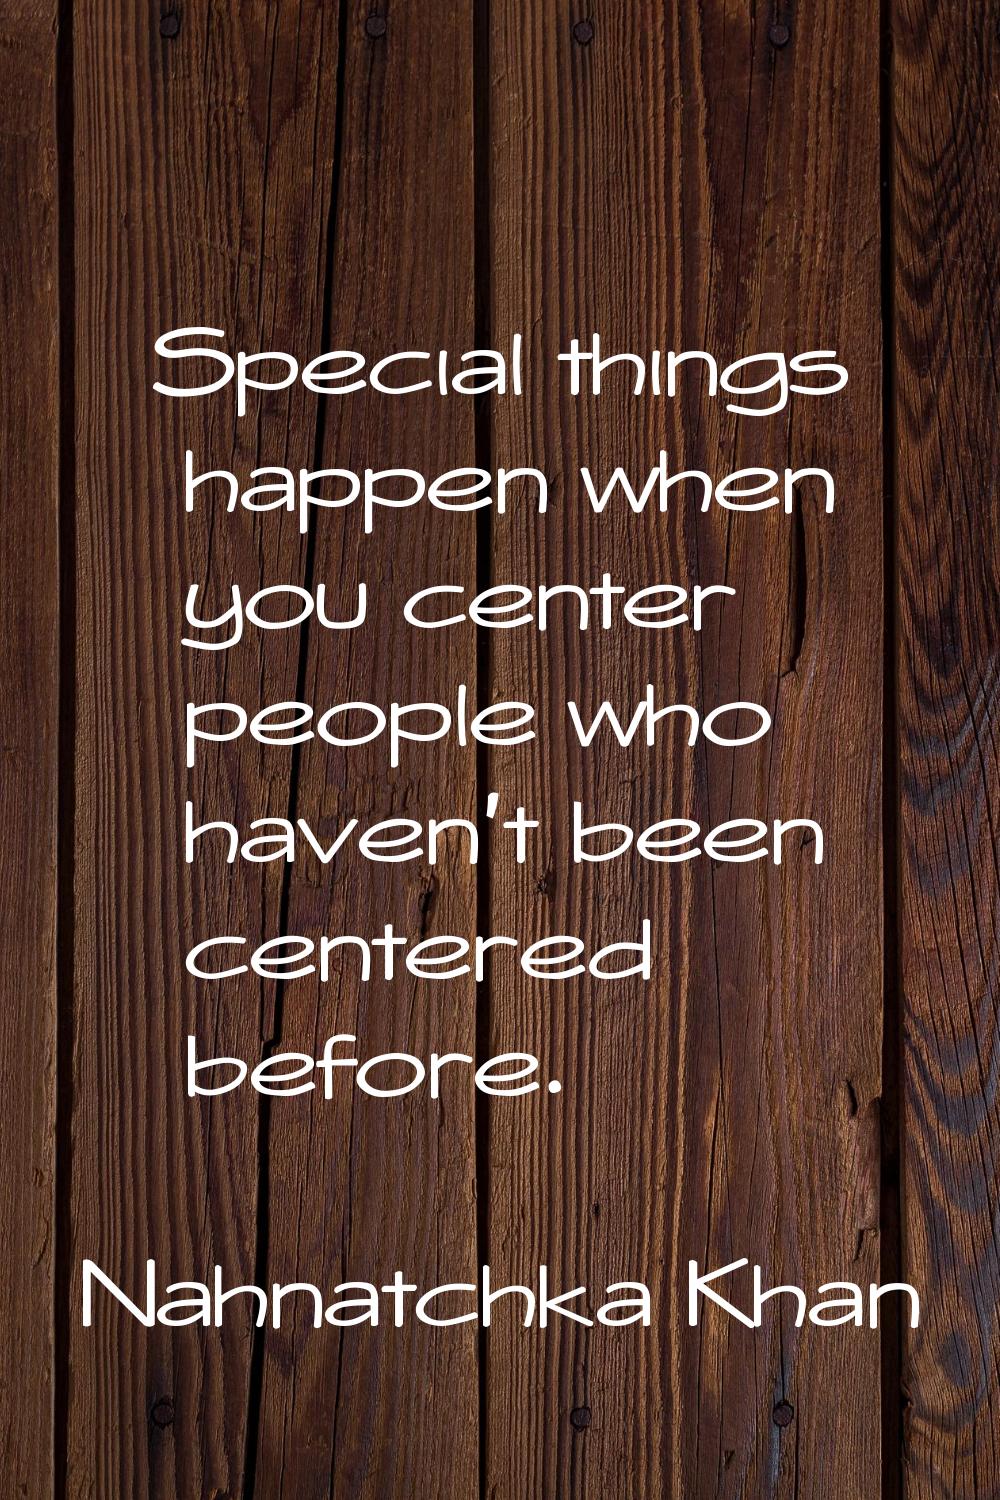 Special things happen when you center people who haven't been centered before.